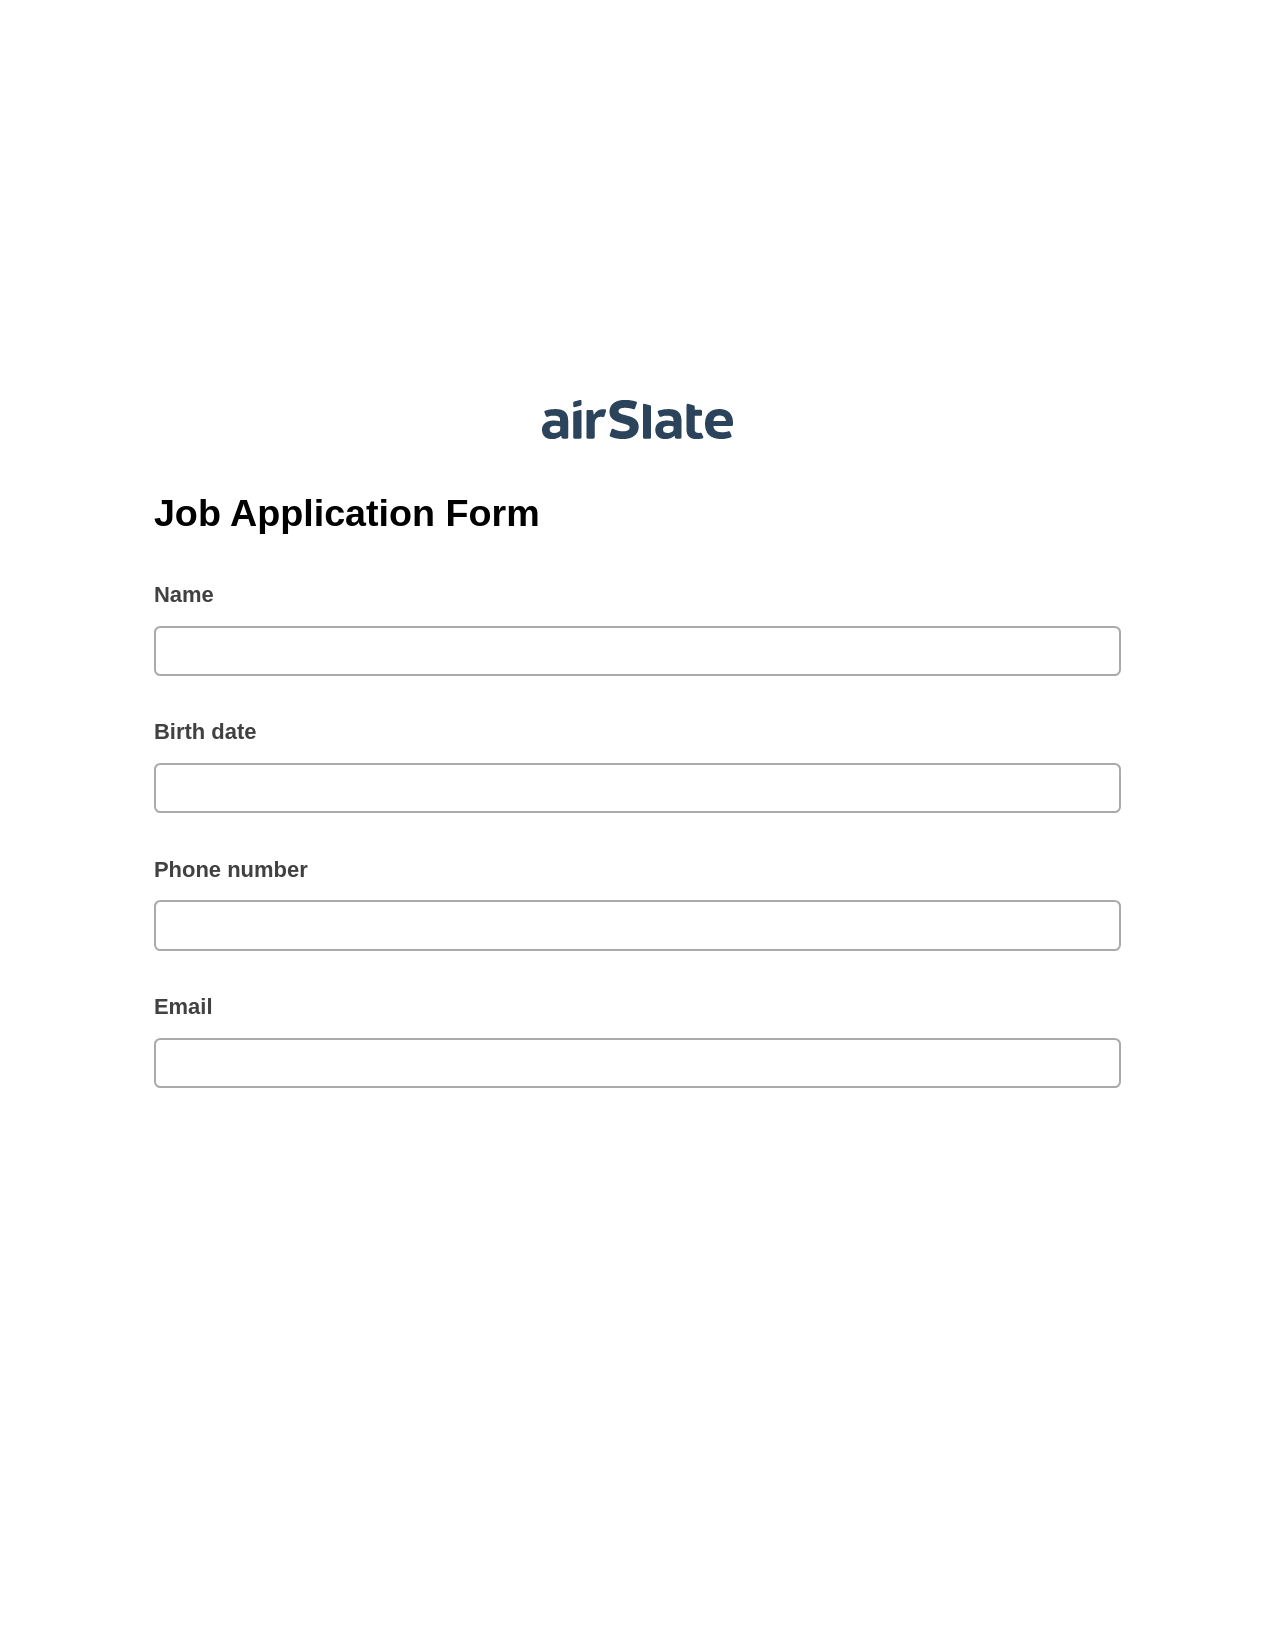 Multirole Job Application Form Pre-fill Dropdown from Airtable, Create slate bot, Export to Excel 365 Bot